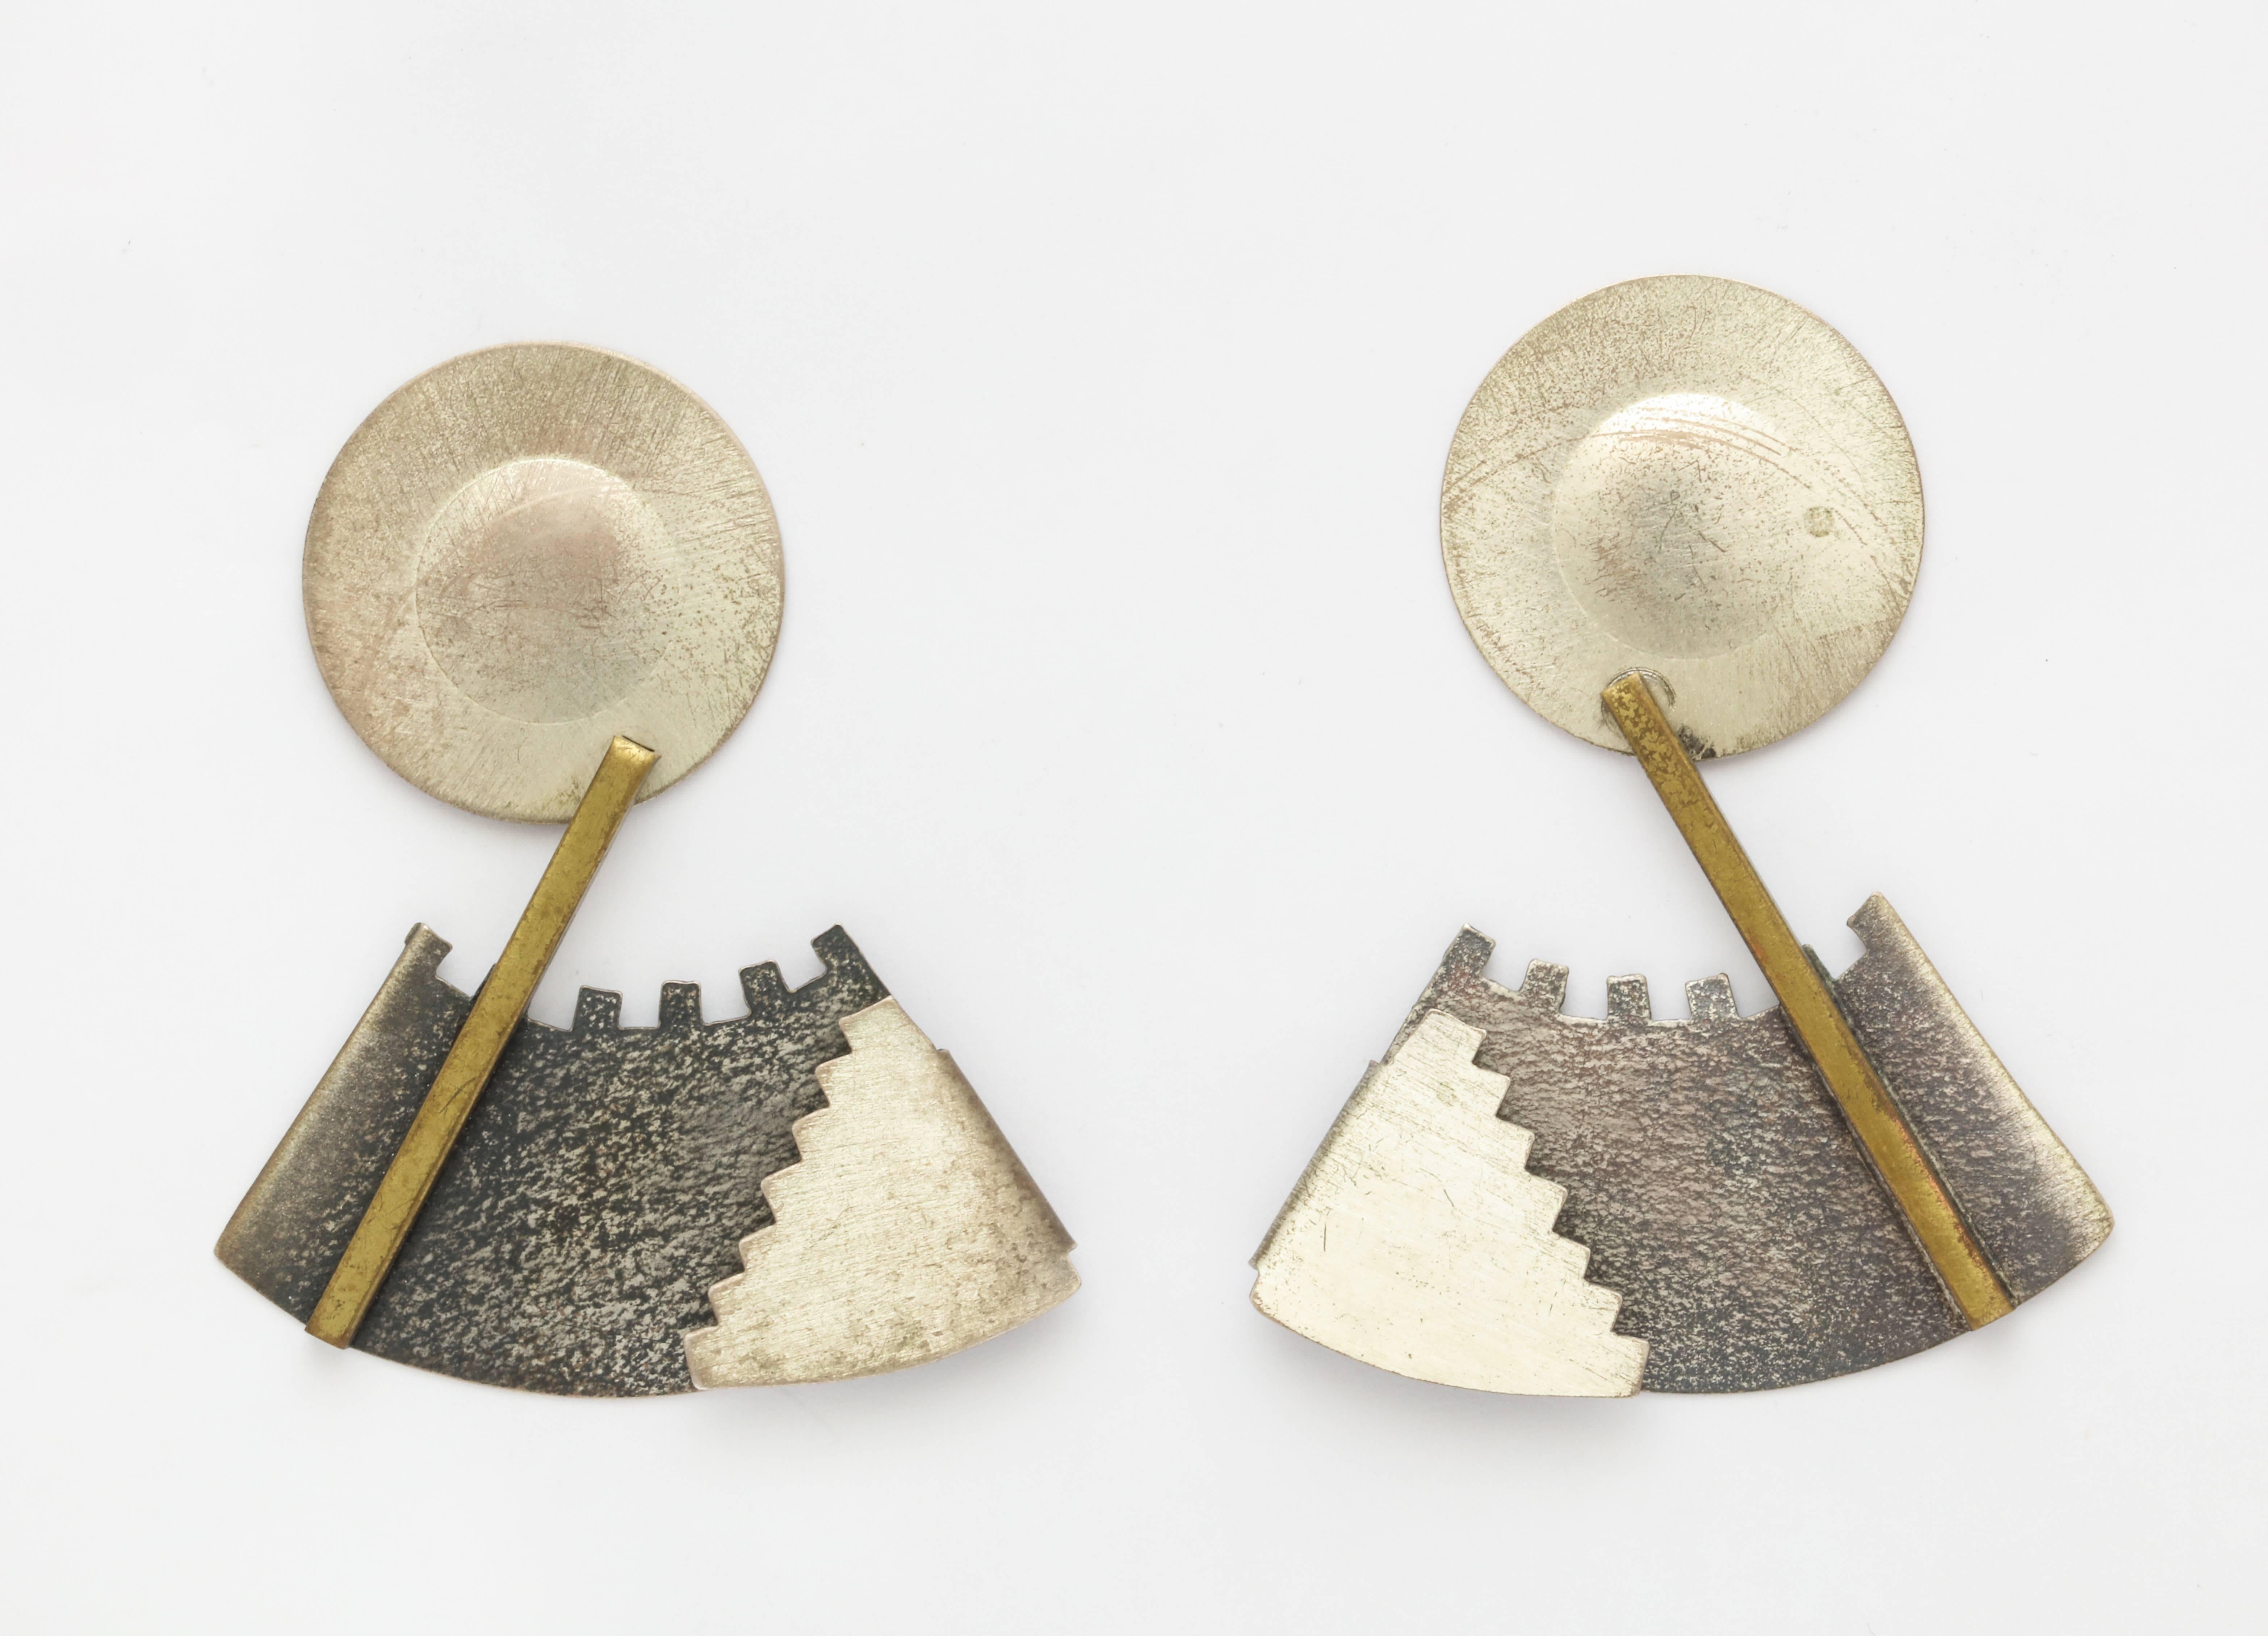 A wonderfully crafted pair of Memphis style earrings in silver and brass by an American Artisan with hand hammered areas and distressed finishes. Unsigned